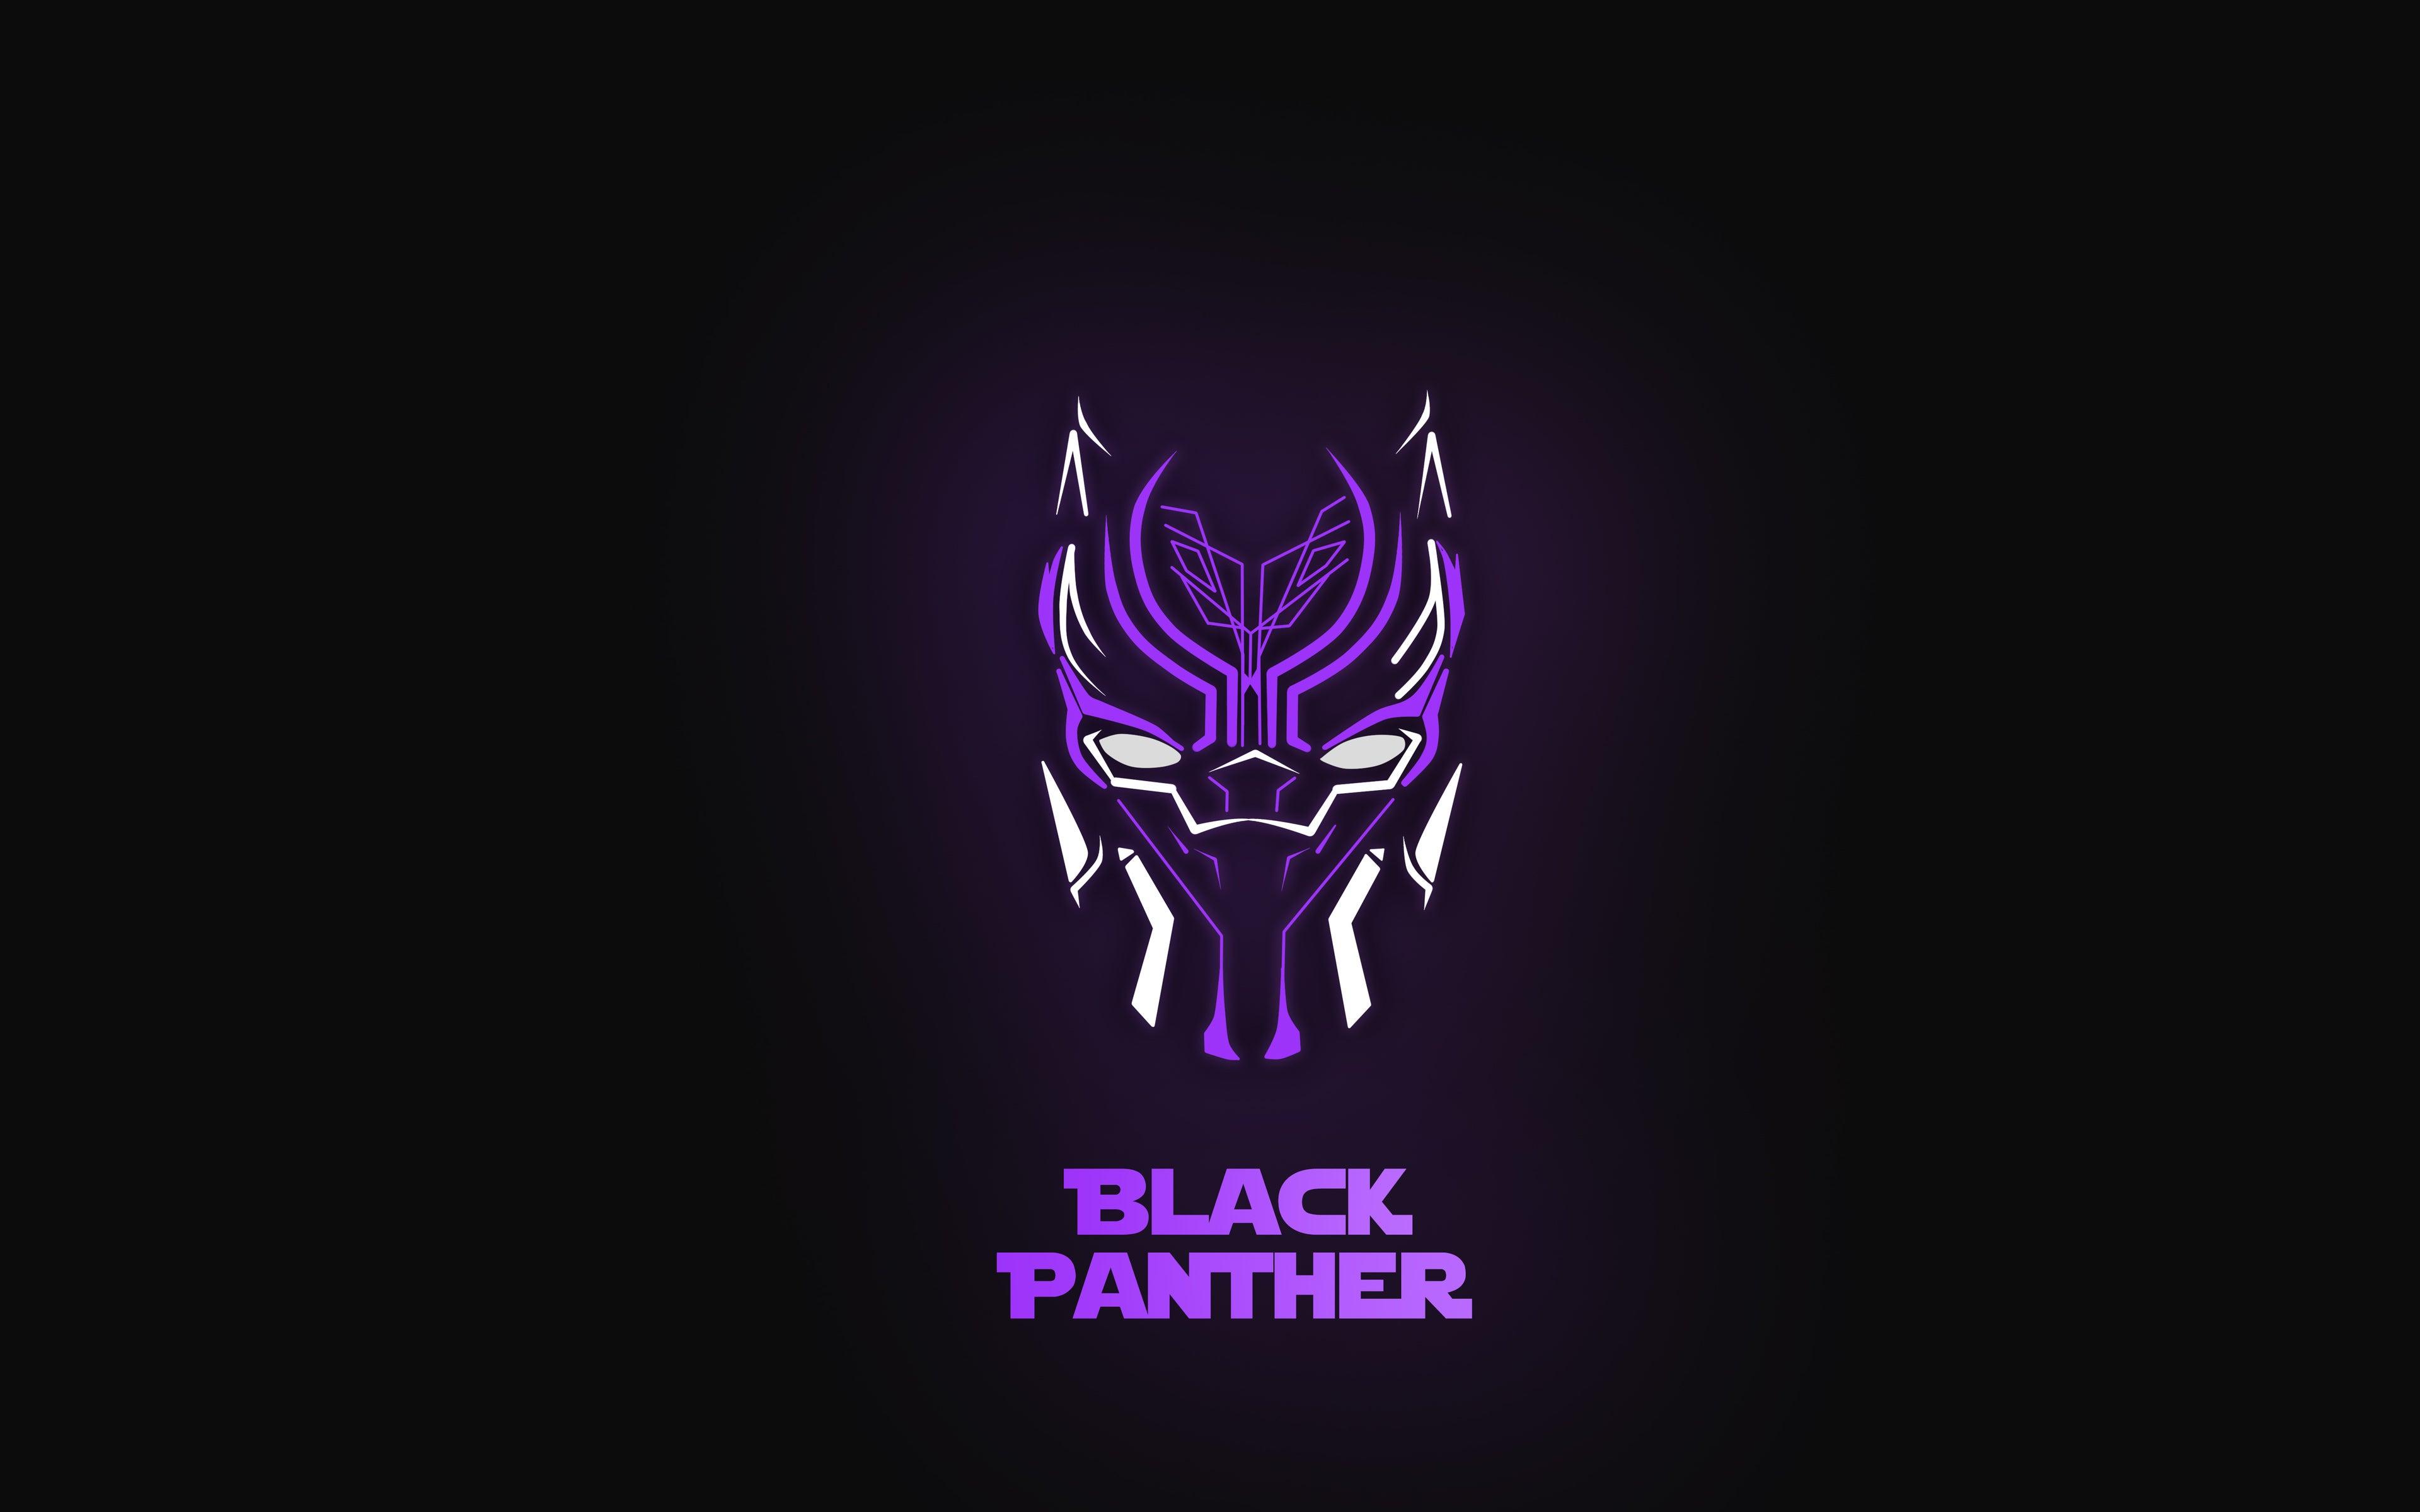 Panther 4K wallpaper for your desktop or mobile screen free and easy to download